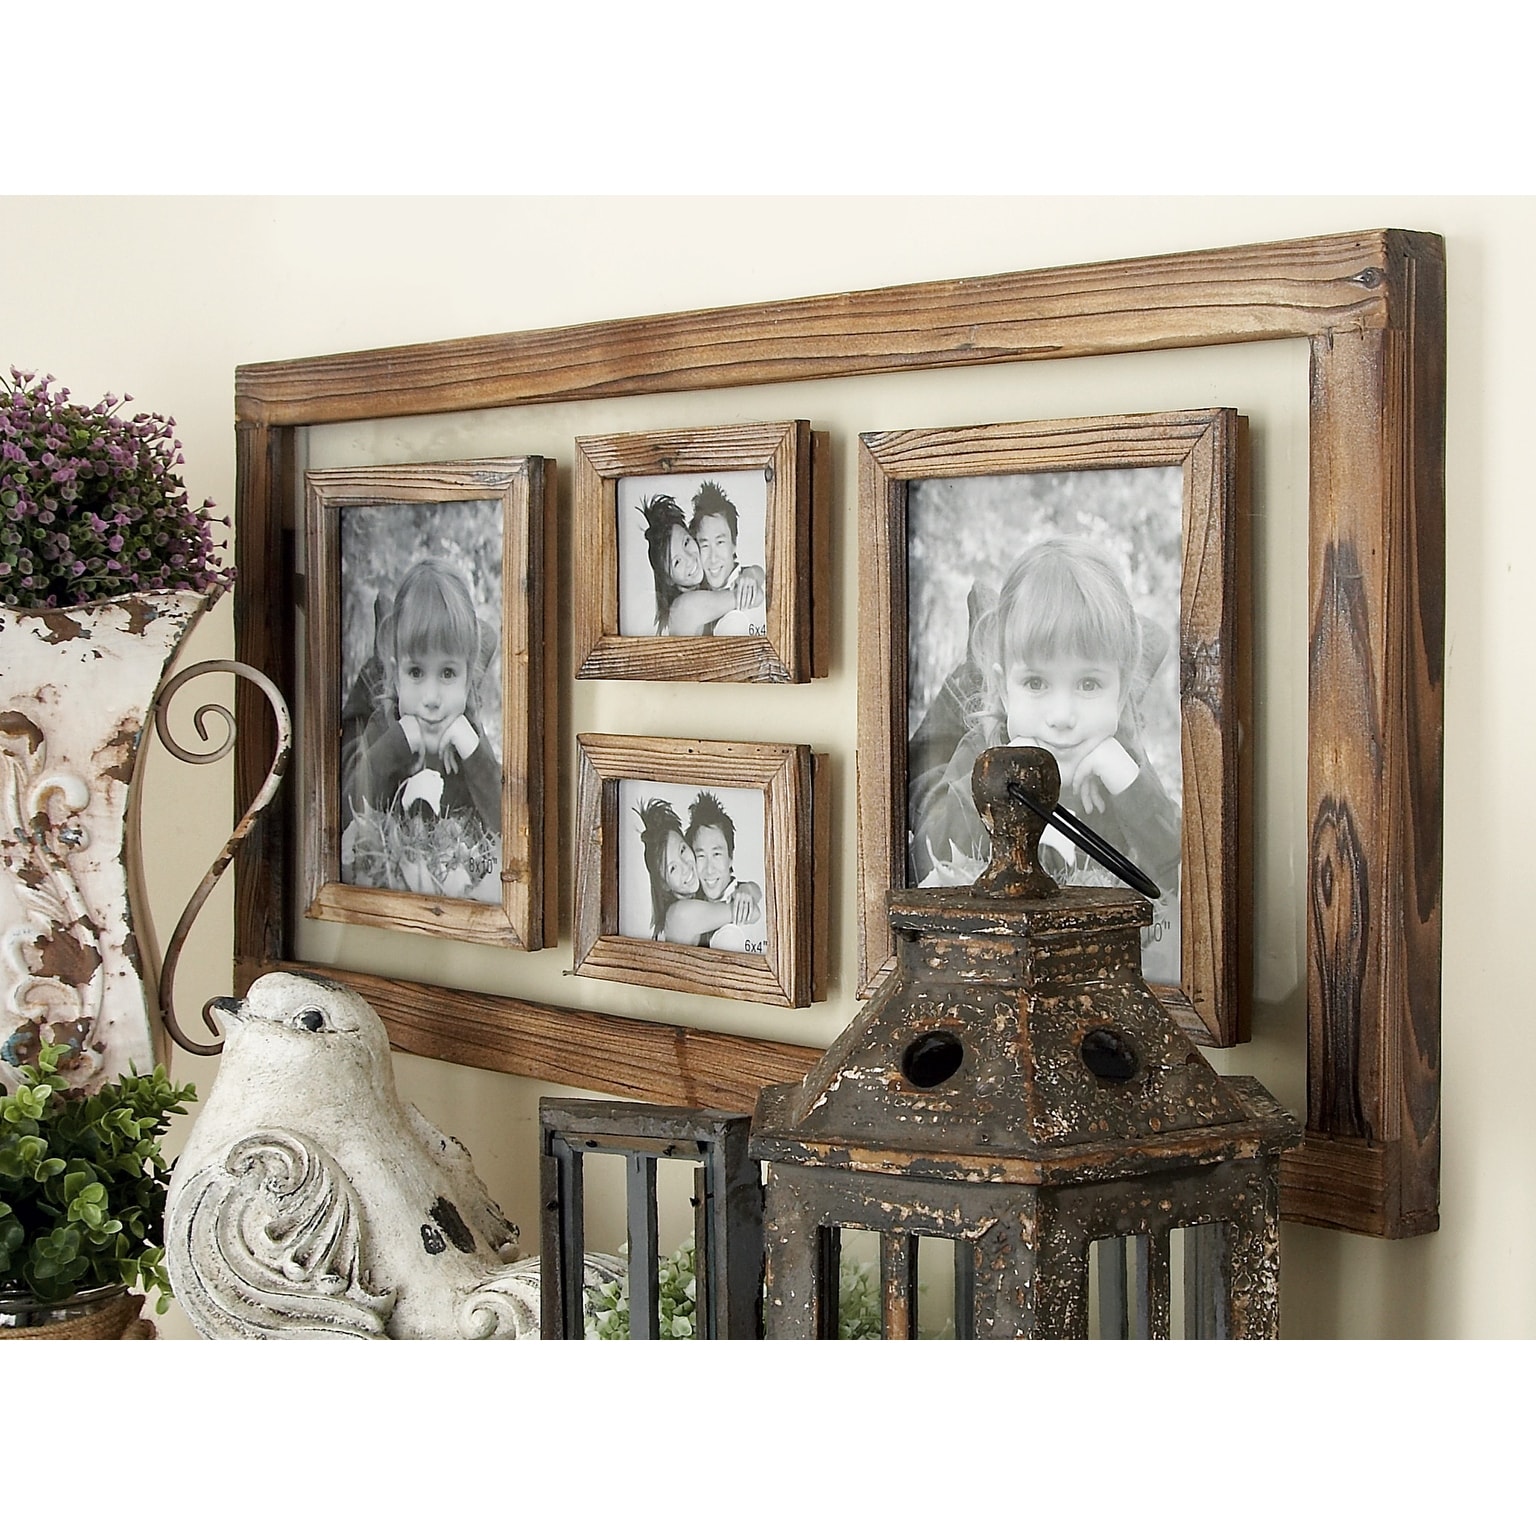 9-Piece Brushed Antique Bronze 4x6 Gallery Wall Frame Set